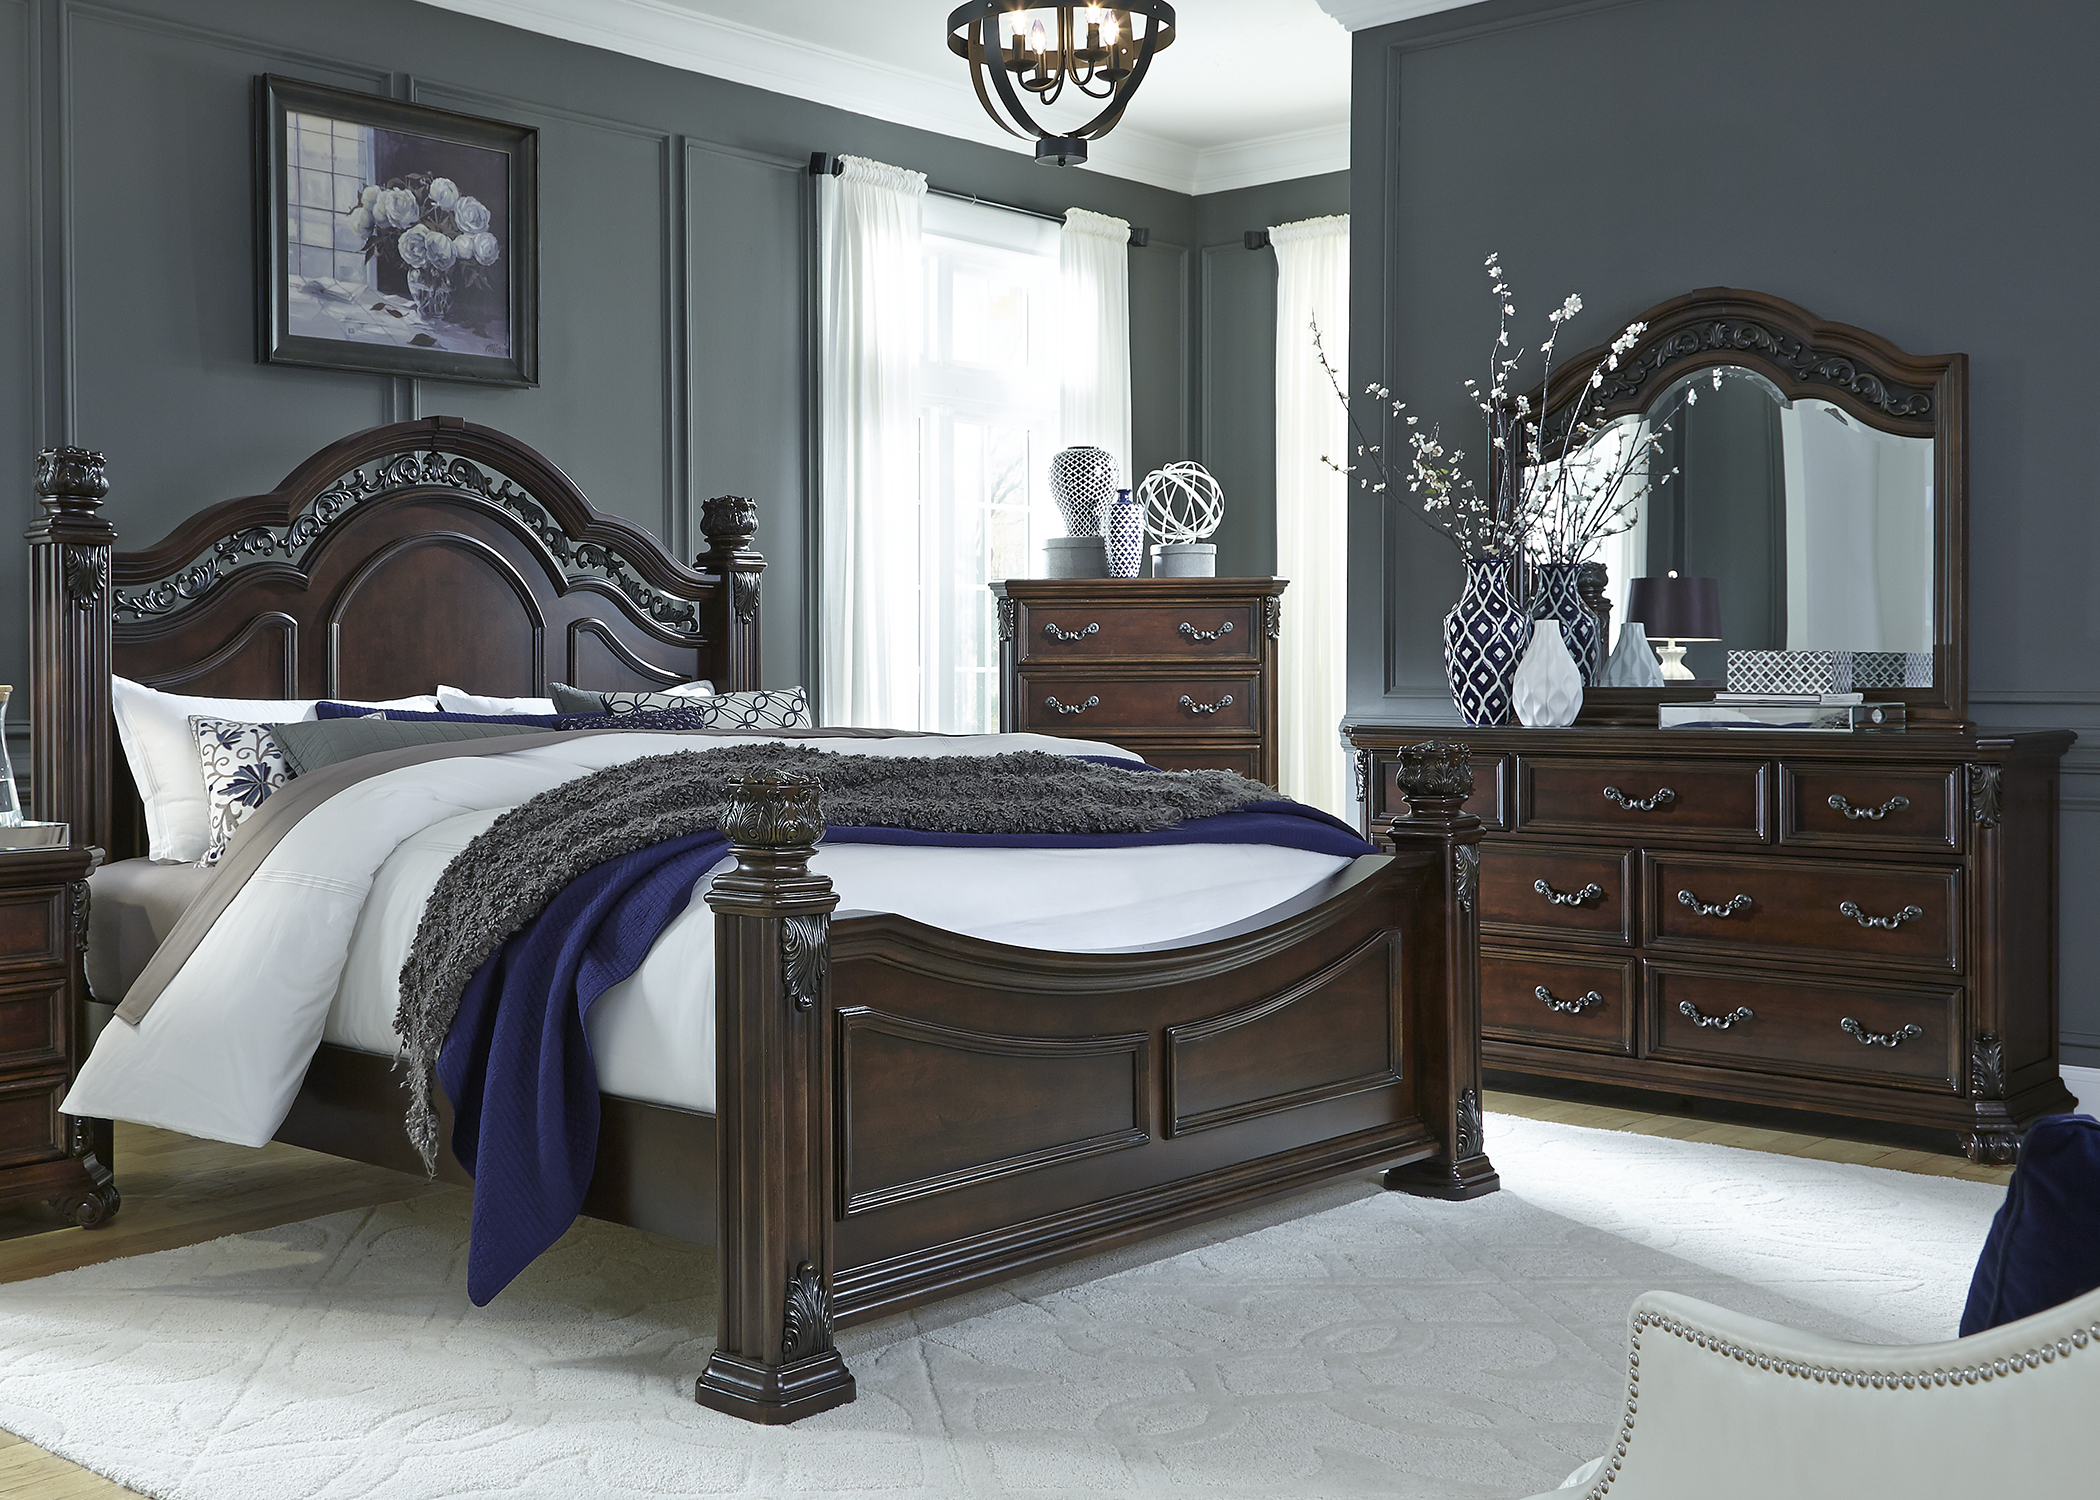 Liberty Furniture Messina Estates Bedroom King Poster Bed, Dresser, Mirror, and Chest Collection